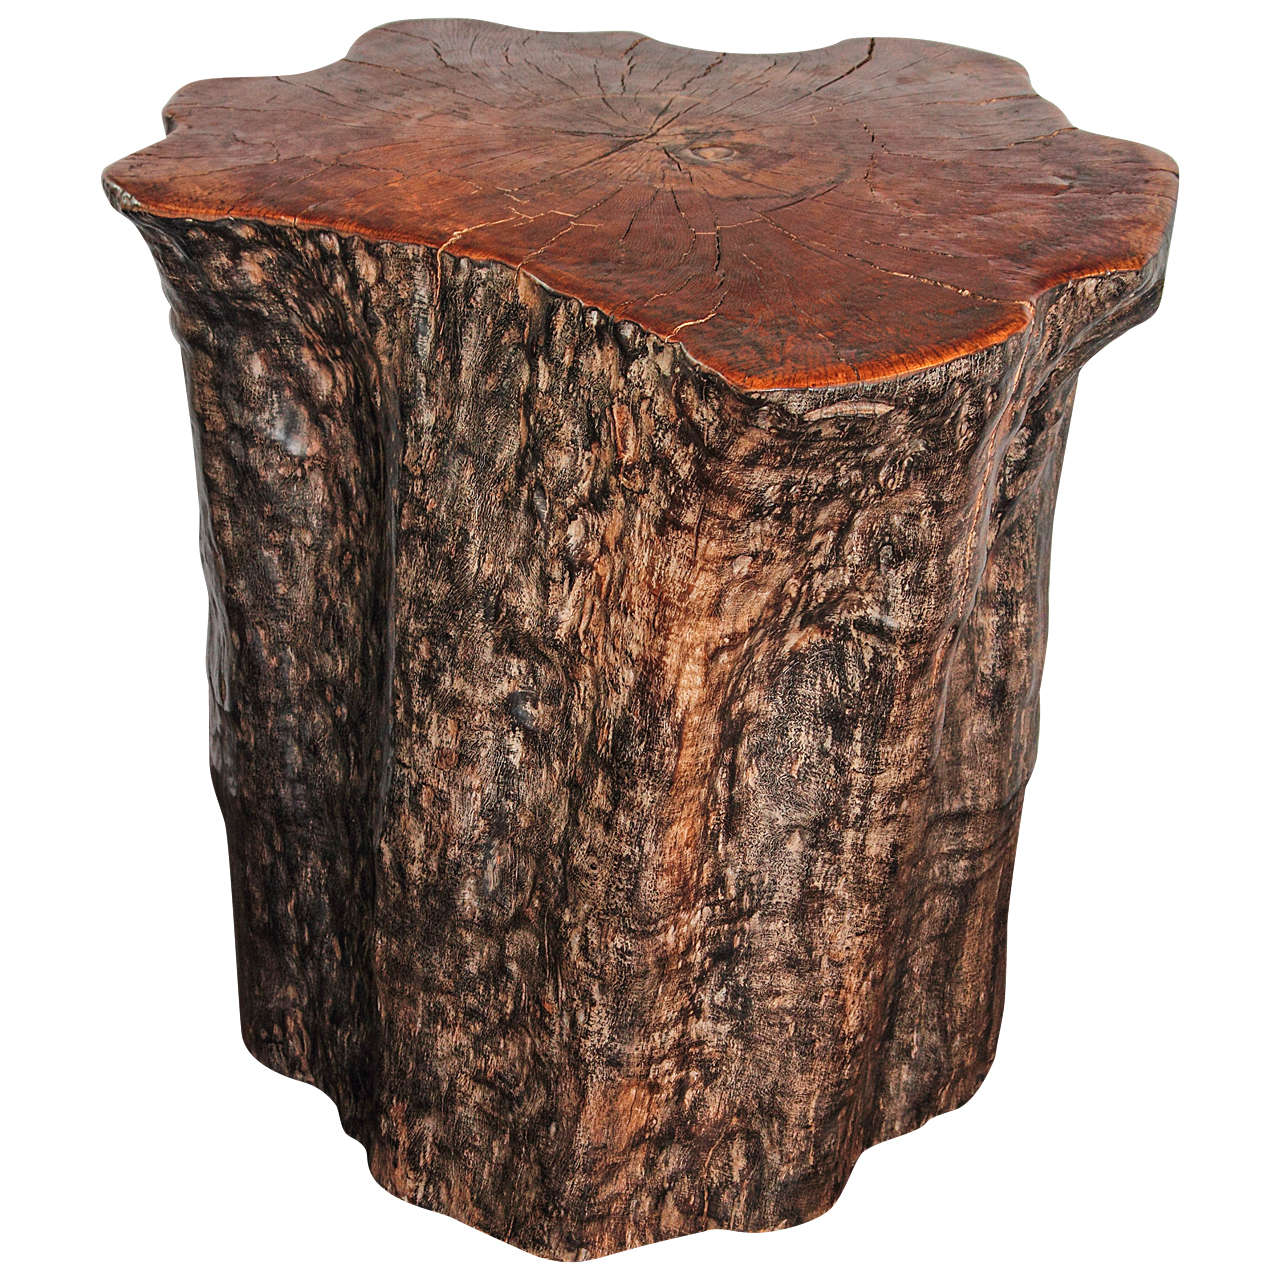 Organic Form Lychee Tree Trunk Pedestal or End Table